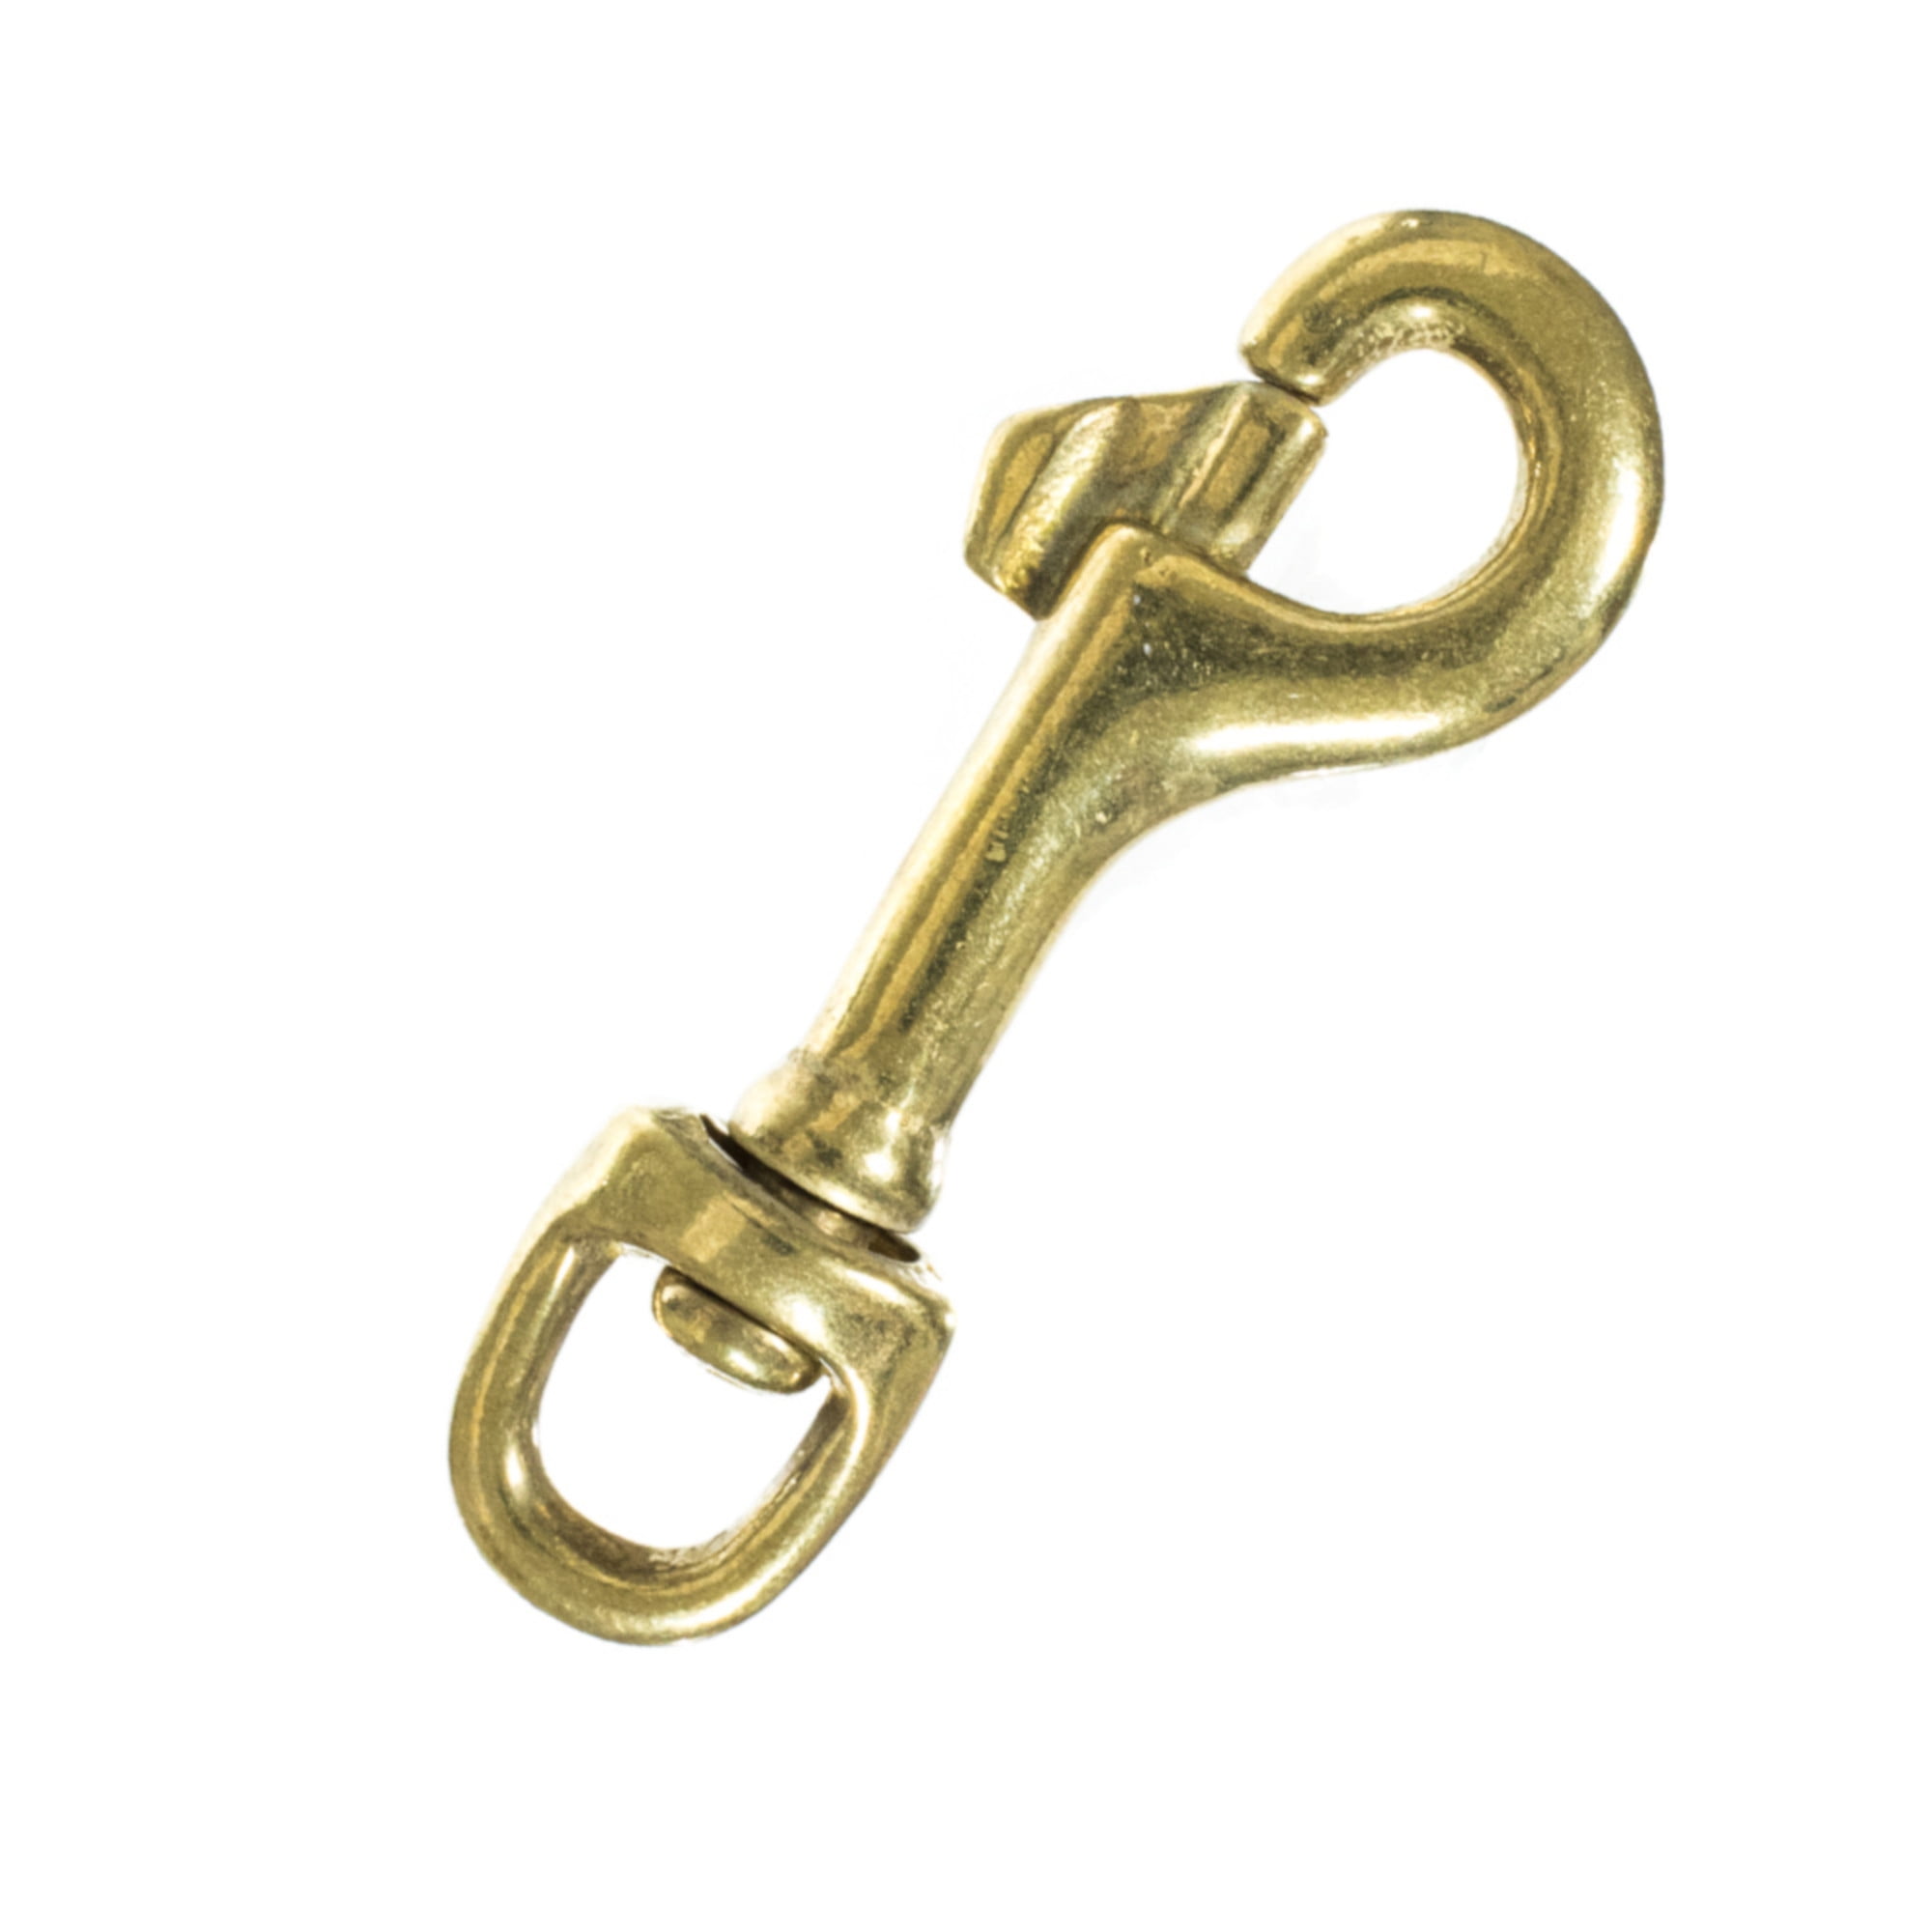 swivel hook and d ring | KJ087 1 inch swivel hook and d ring for purse